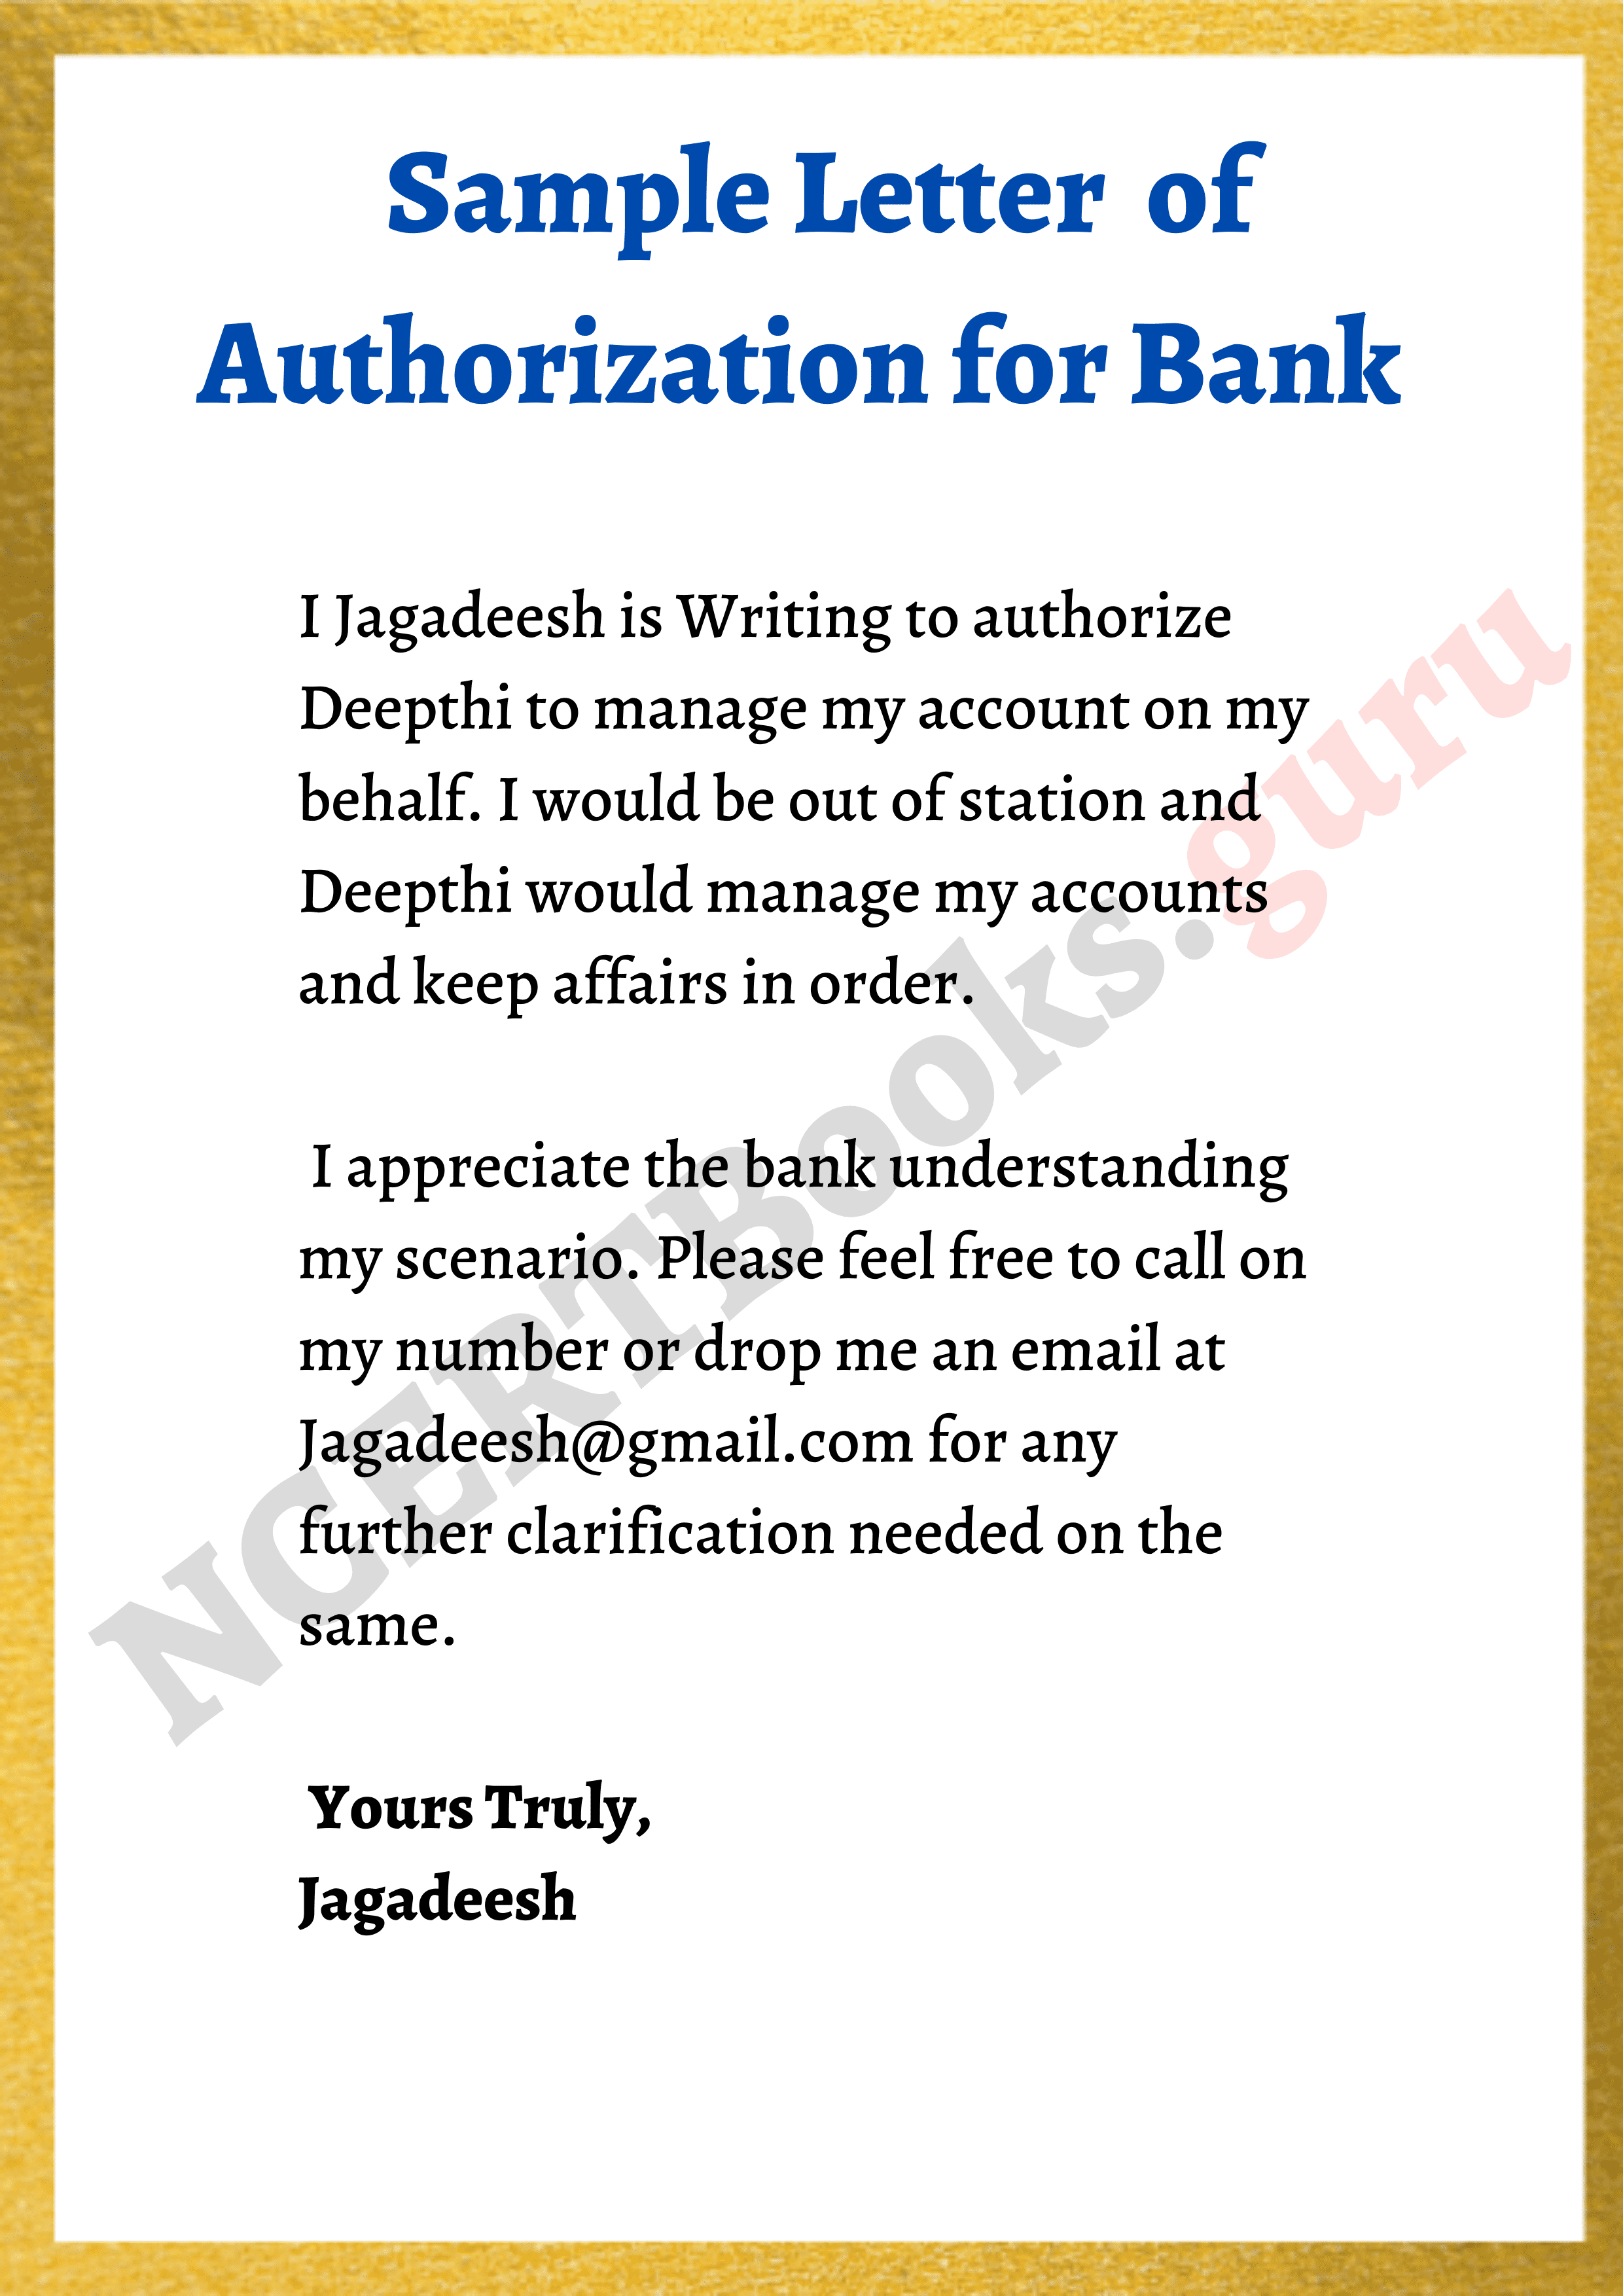 Sample Letter of Authorization for Bank